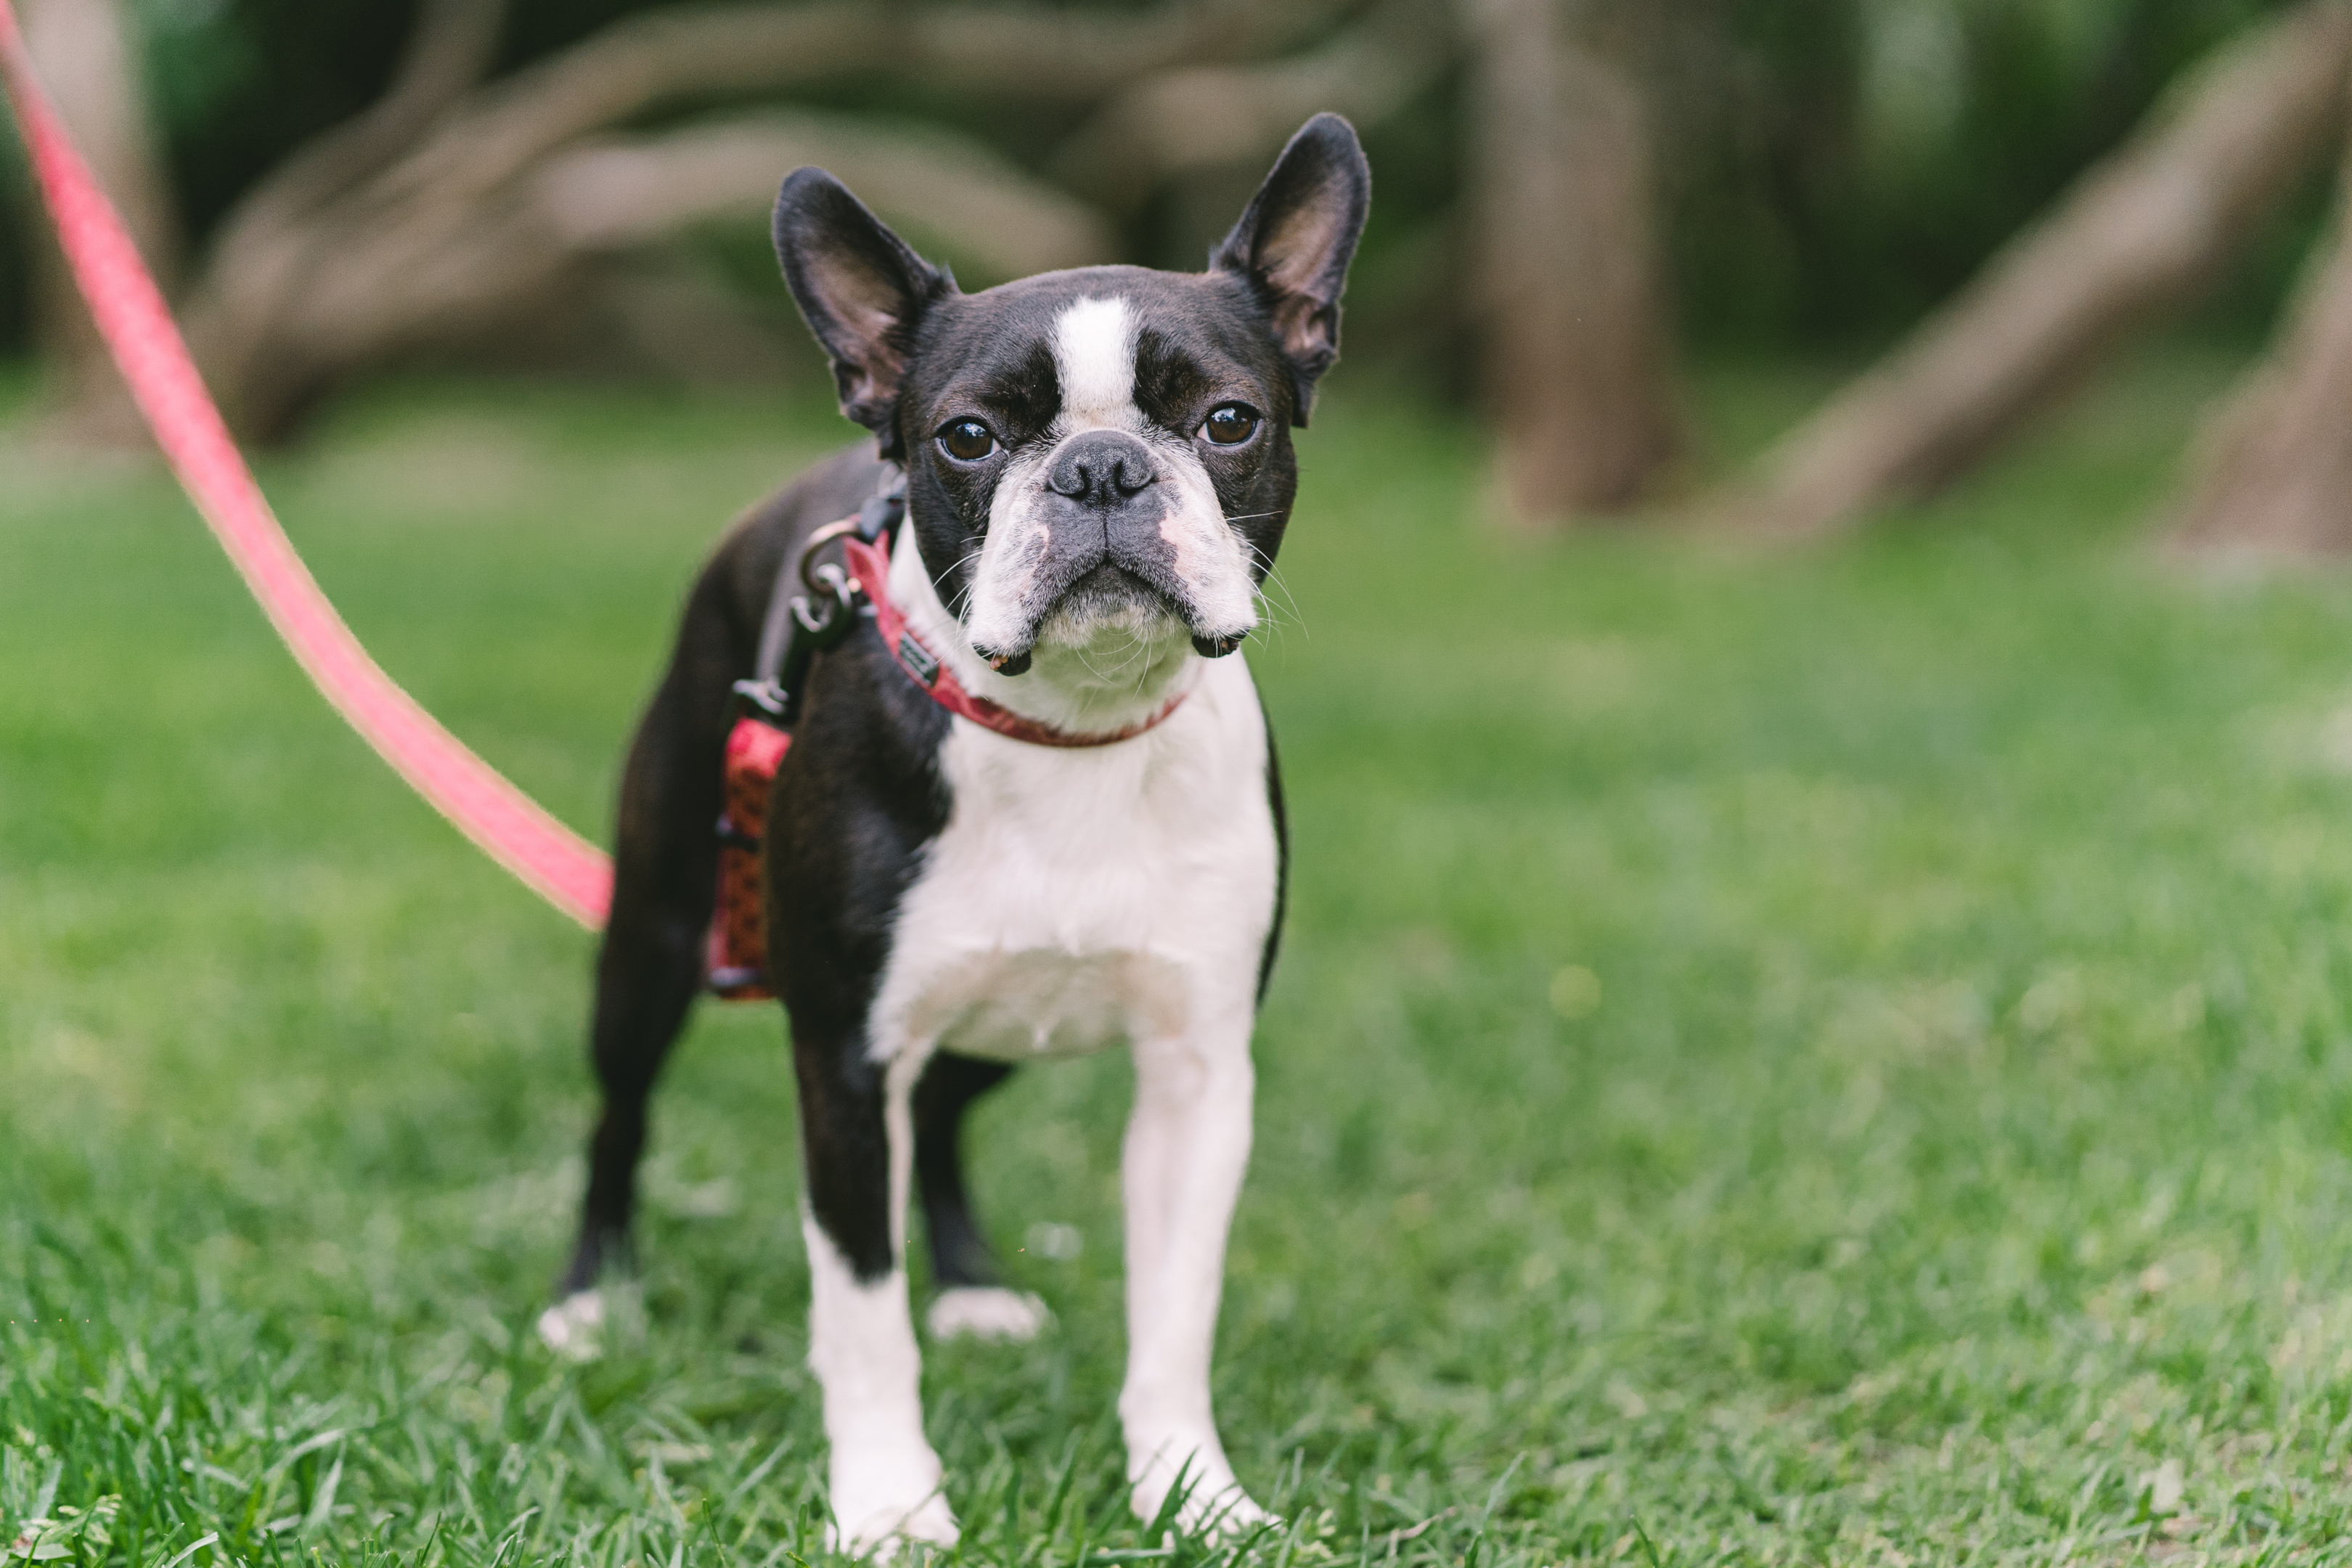 Grown Boston Terrier at the dog park 